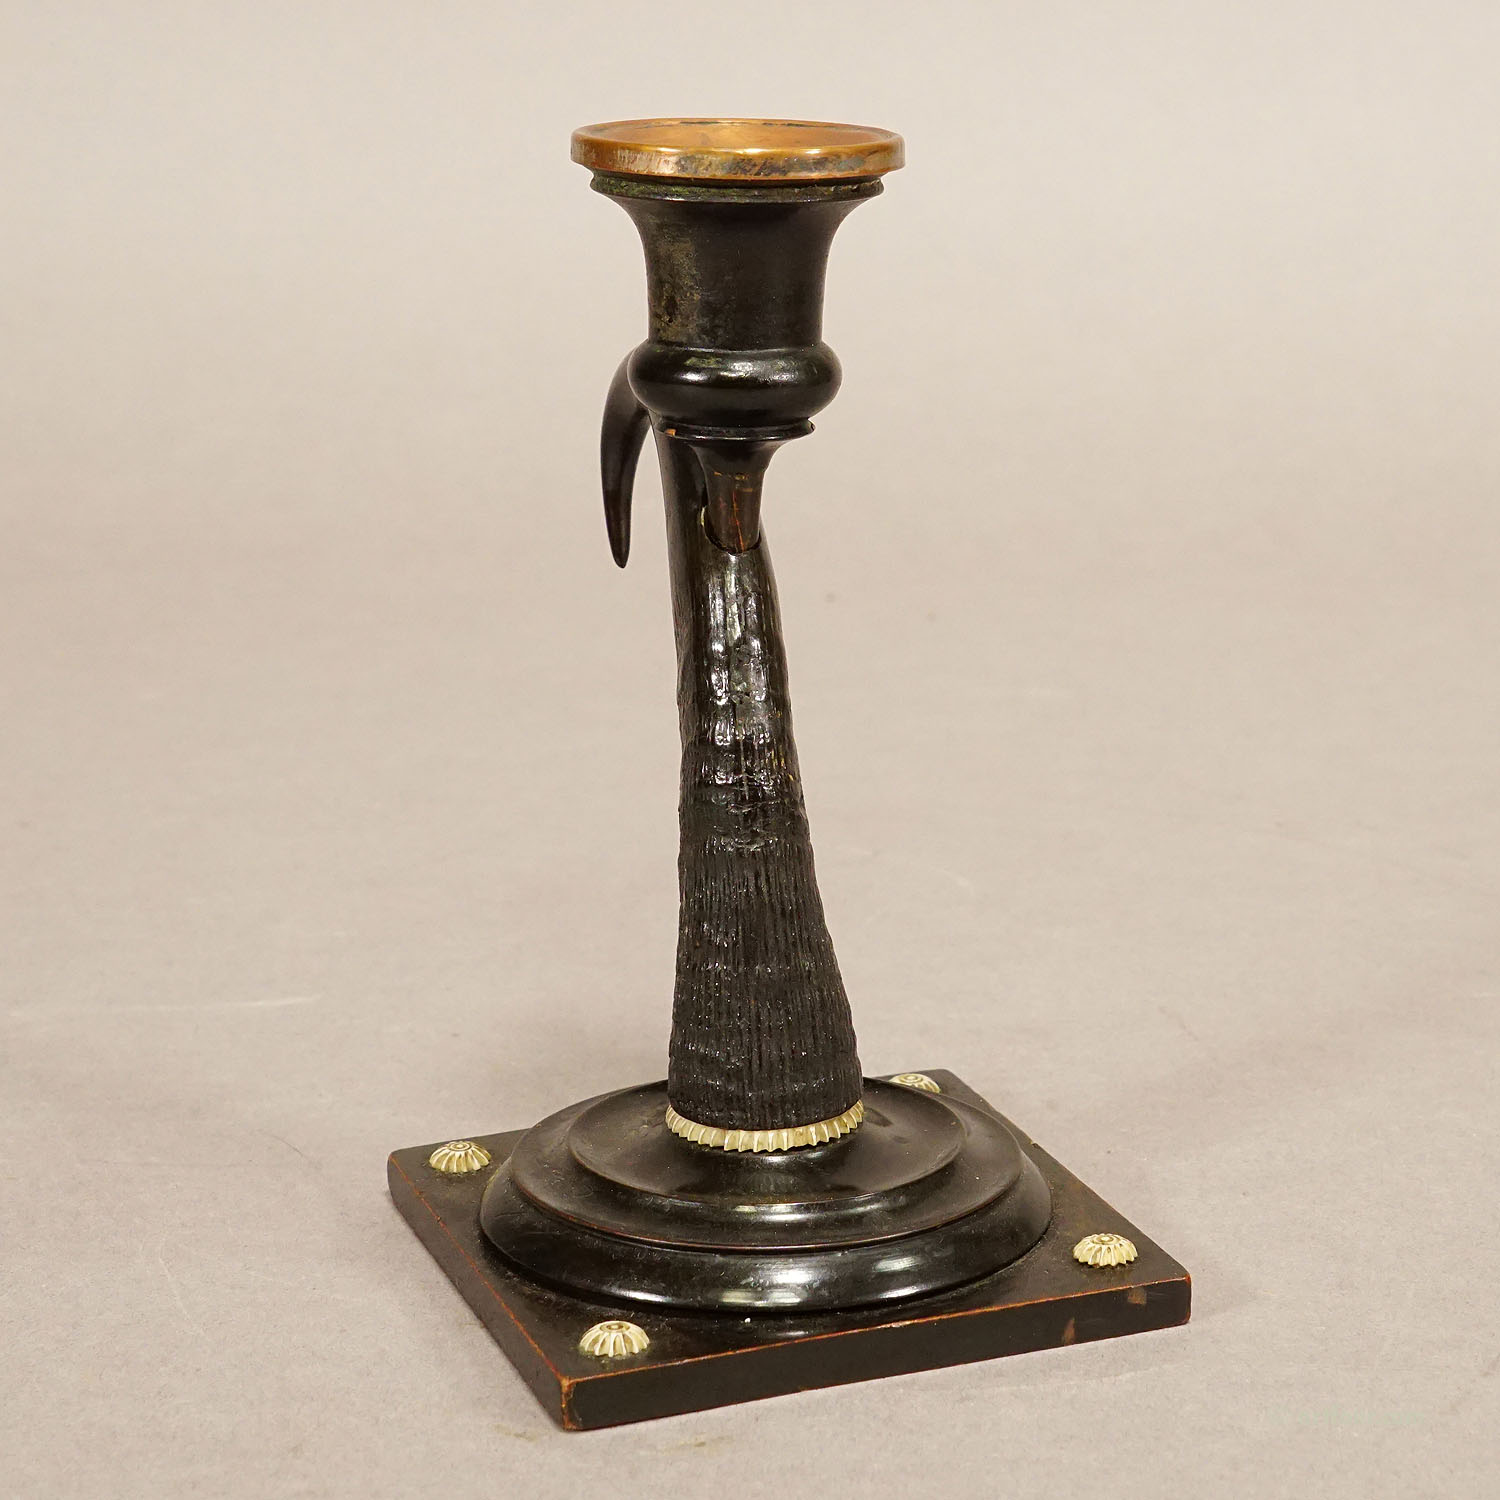 Antique Candle Stick With Real Chamois Horn, 19th Century